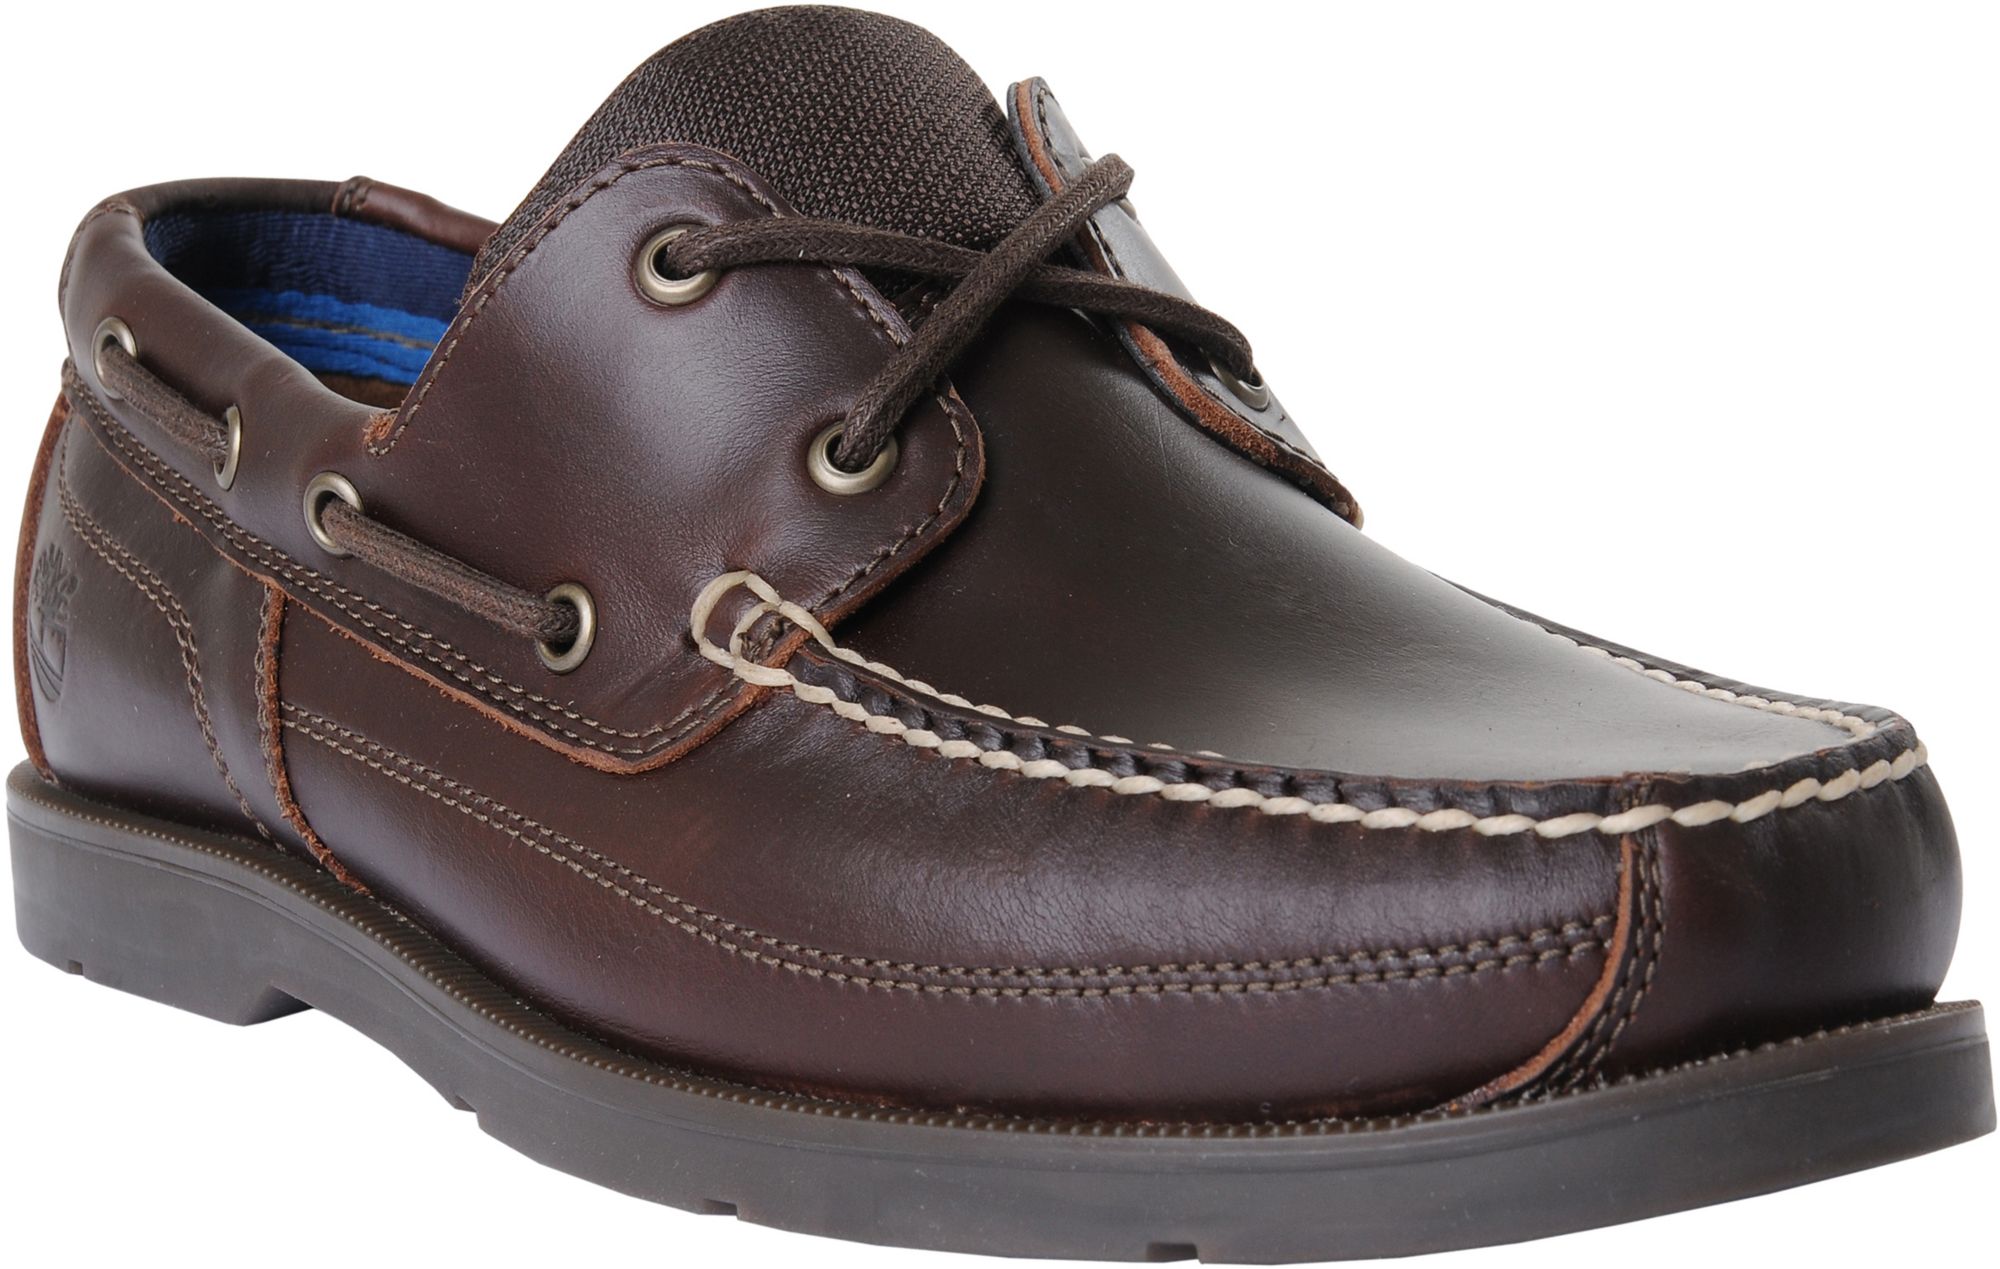 timberland men's piper cove leather boat shoes